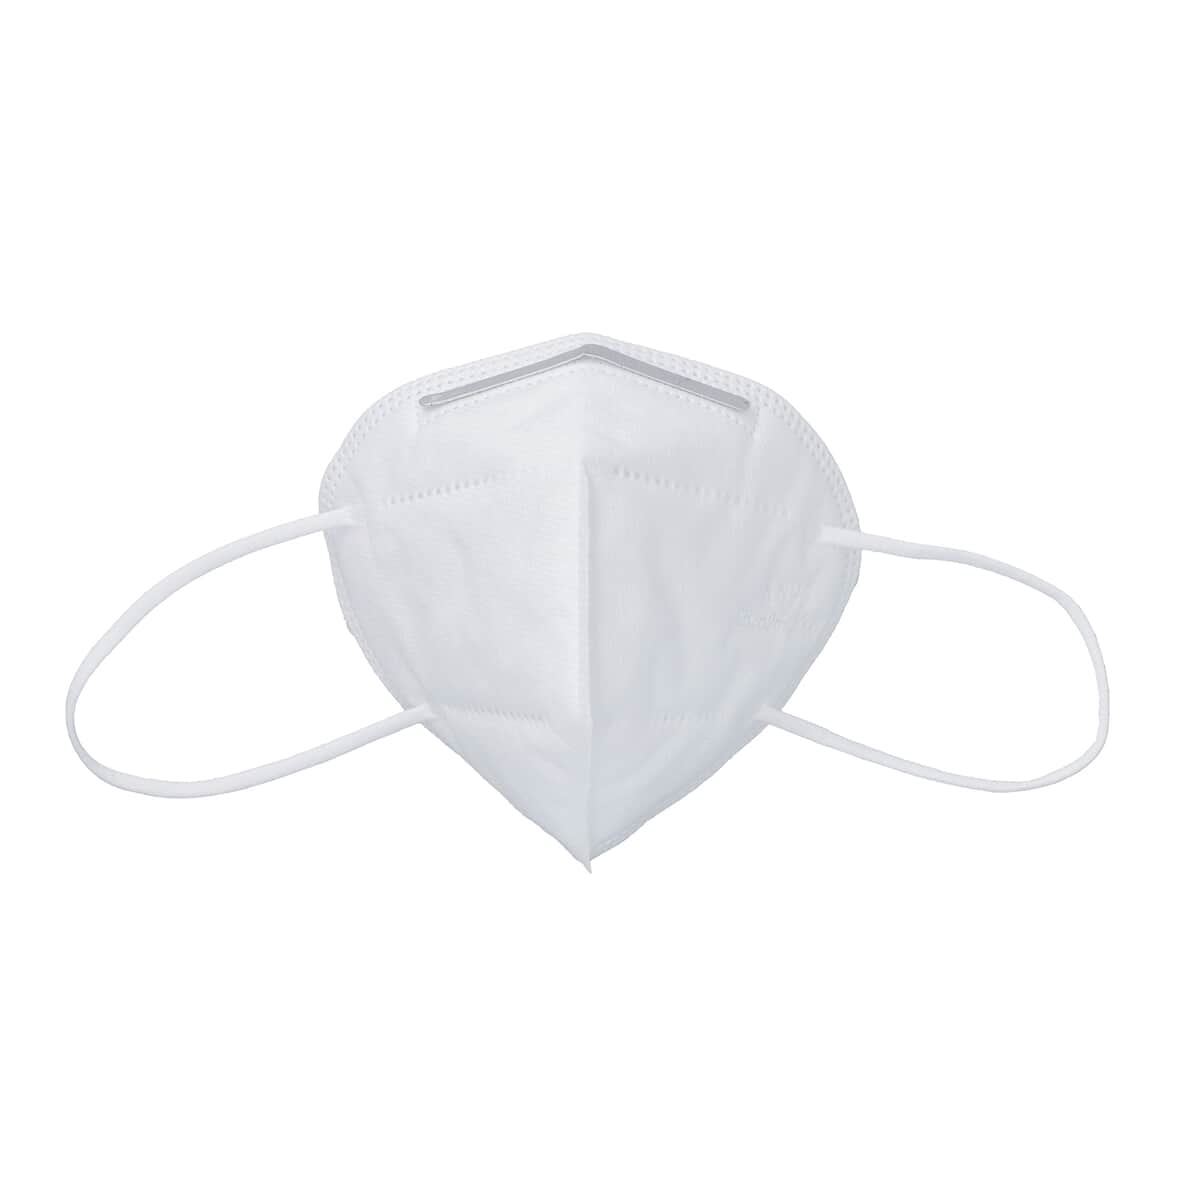 Set of 50 KN95 Disposable Protection Masks 5 Layer Non- Returnable image number 4